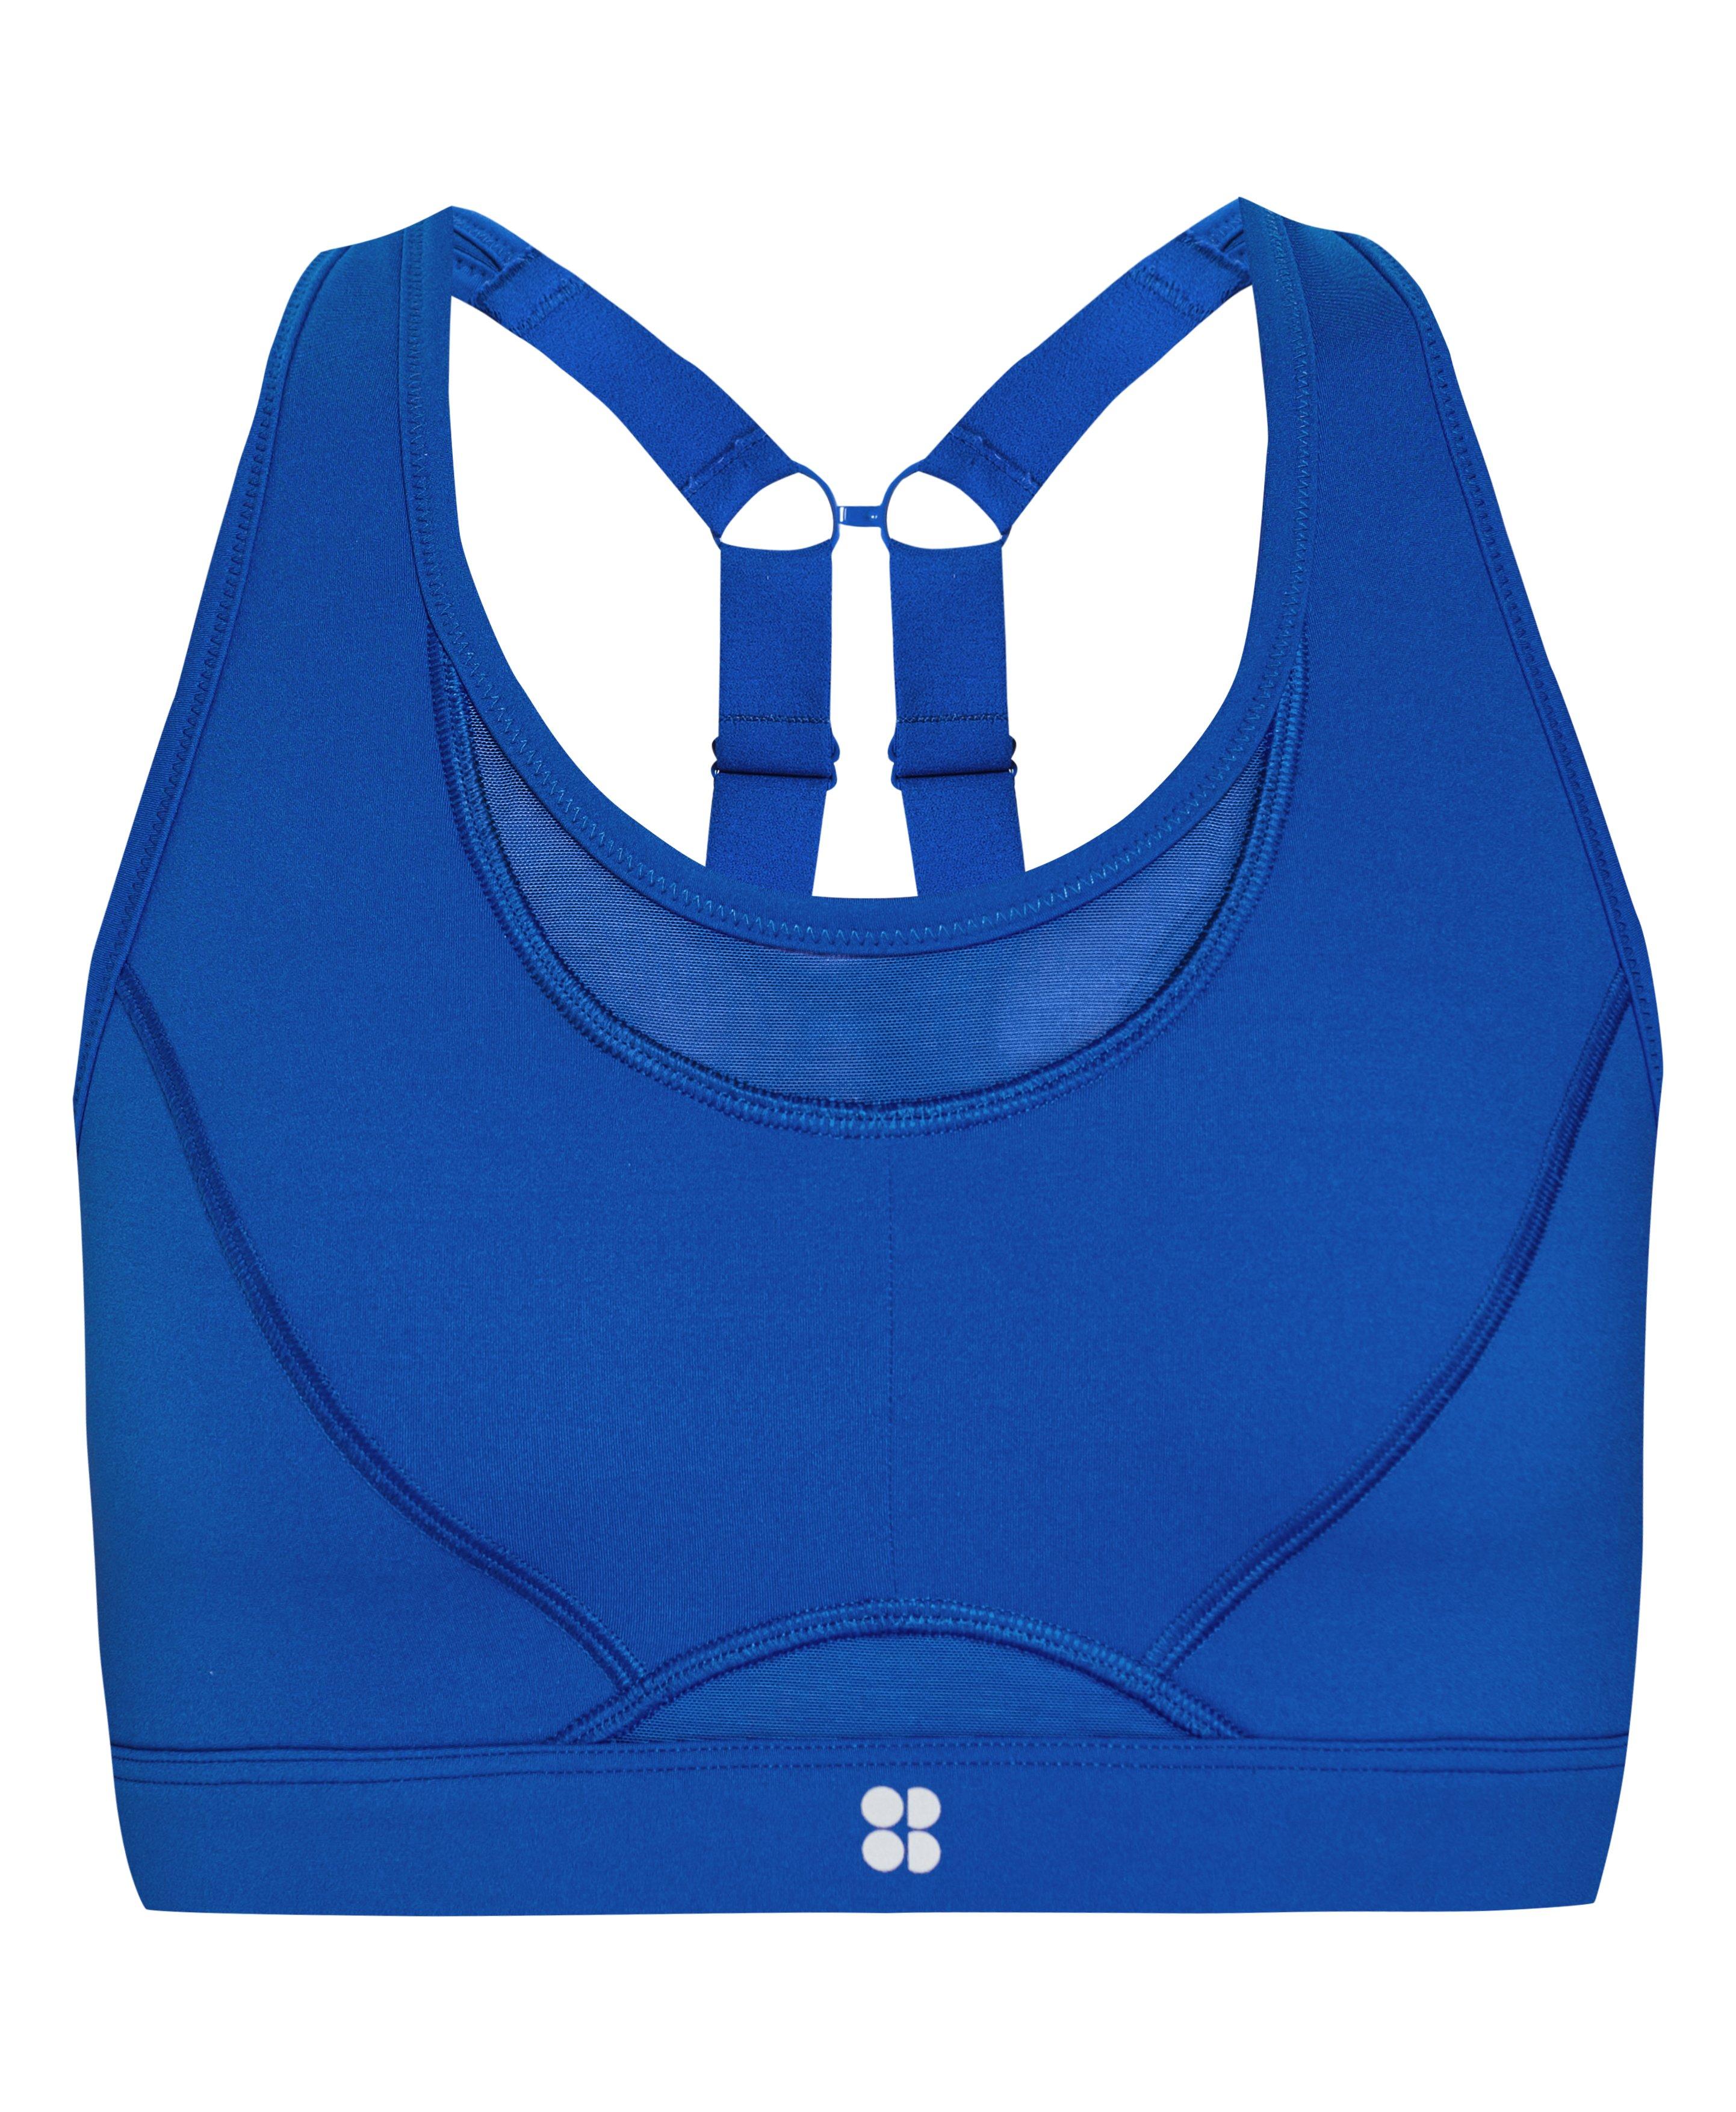  High Impact Sports Bras For Running